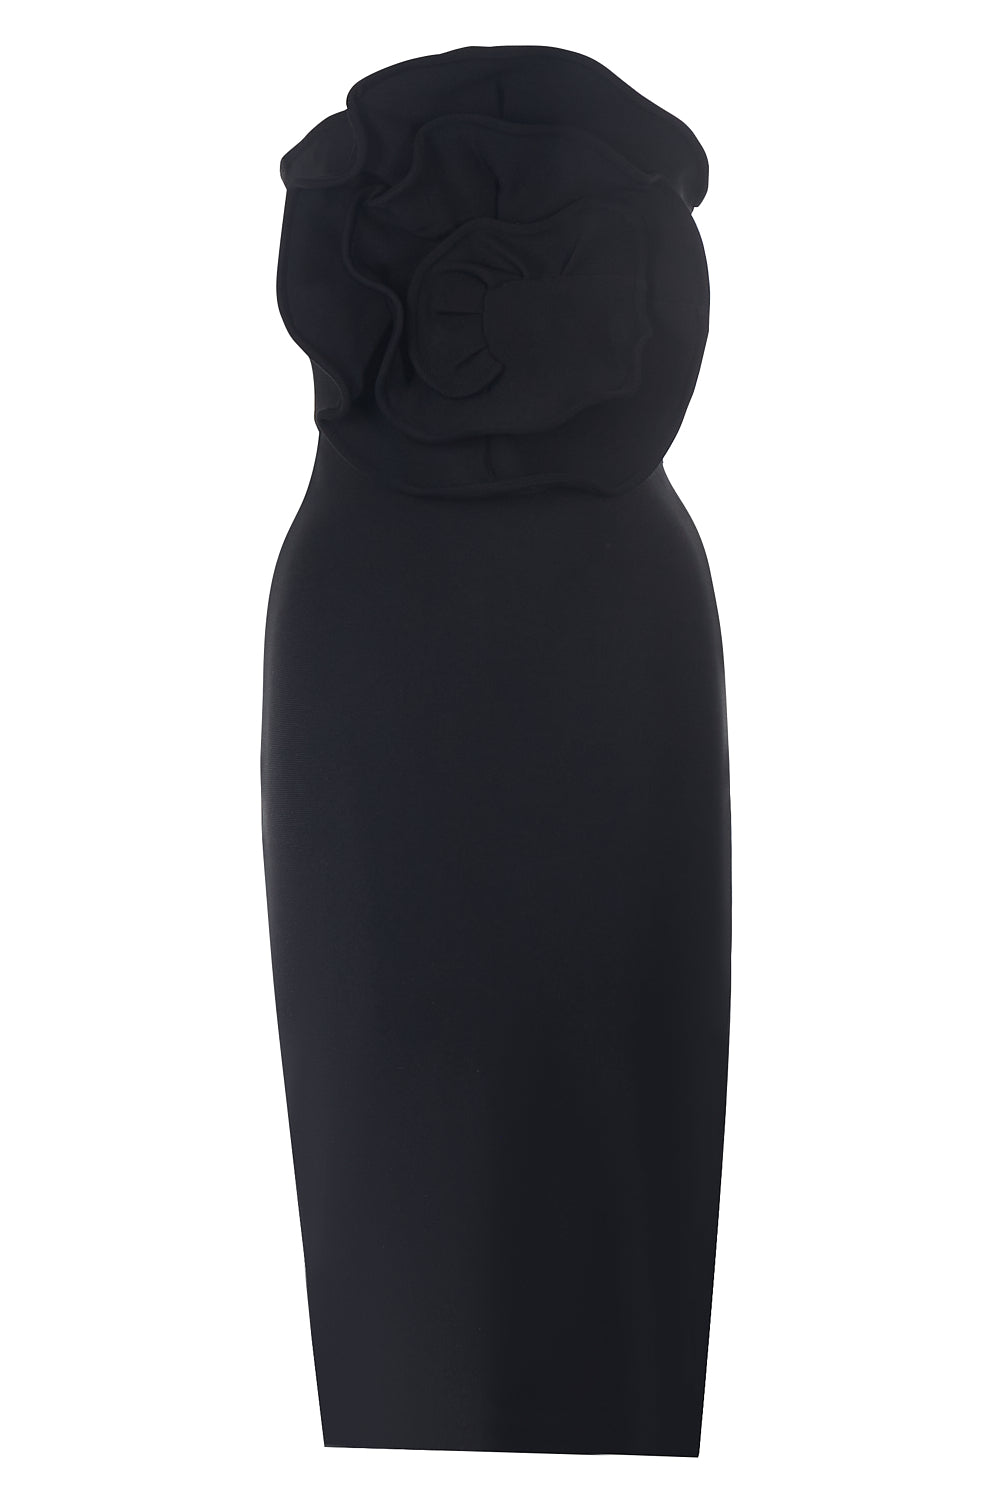 Sesidy Floral Black Strapless Dress in Default Title